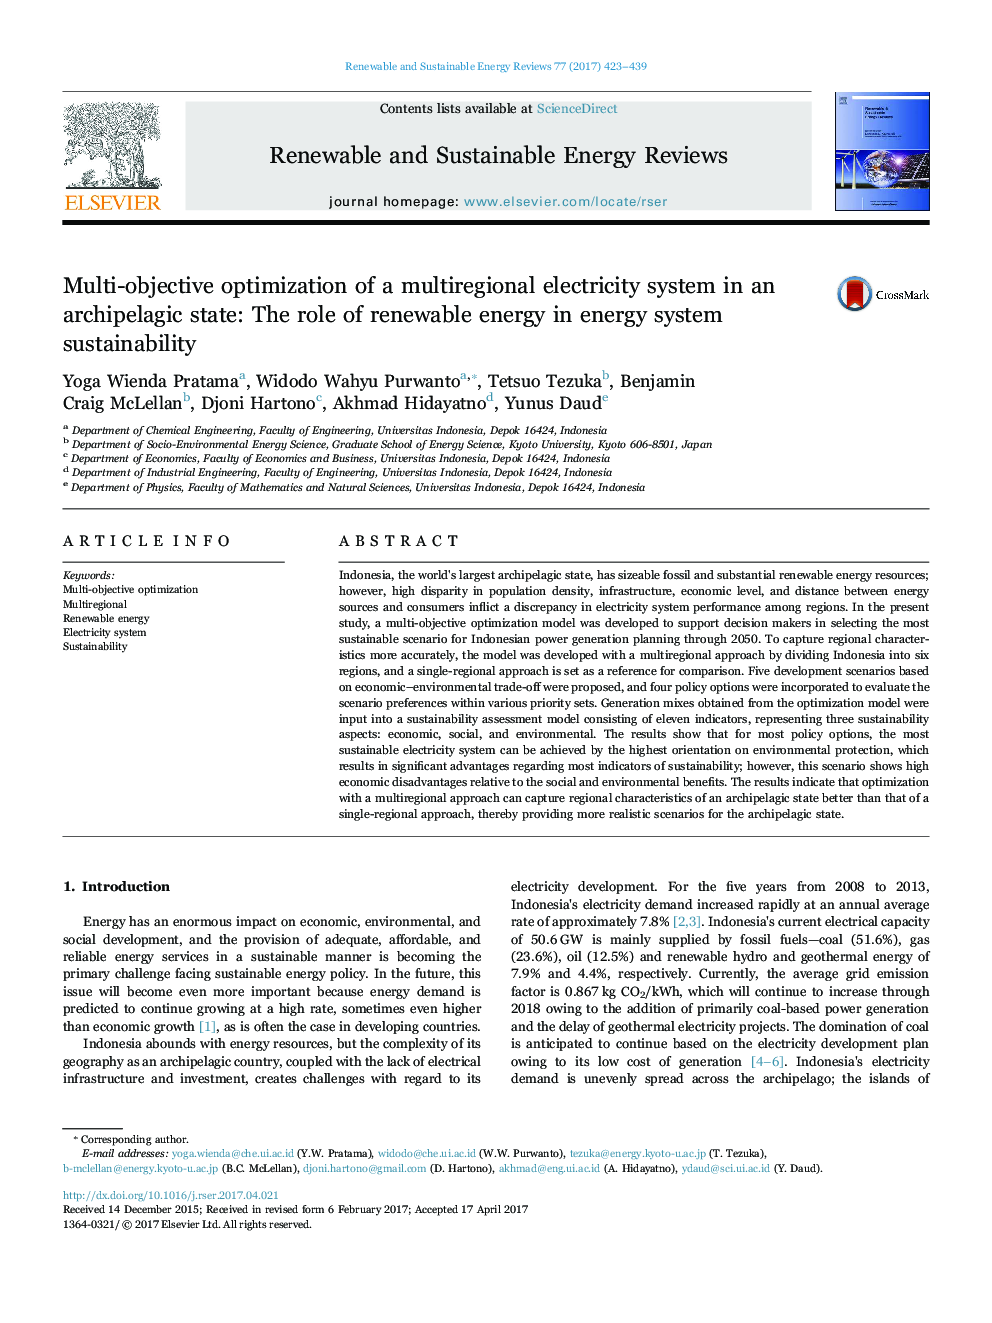 Multi-objective optimization of a multiregional electricity system in an archipelagic state: The role of renewable energy in energy system sustainability